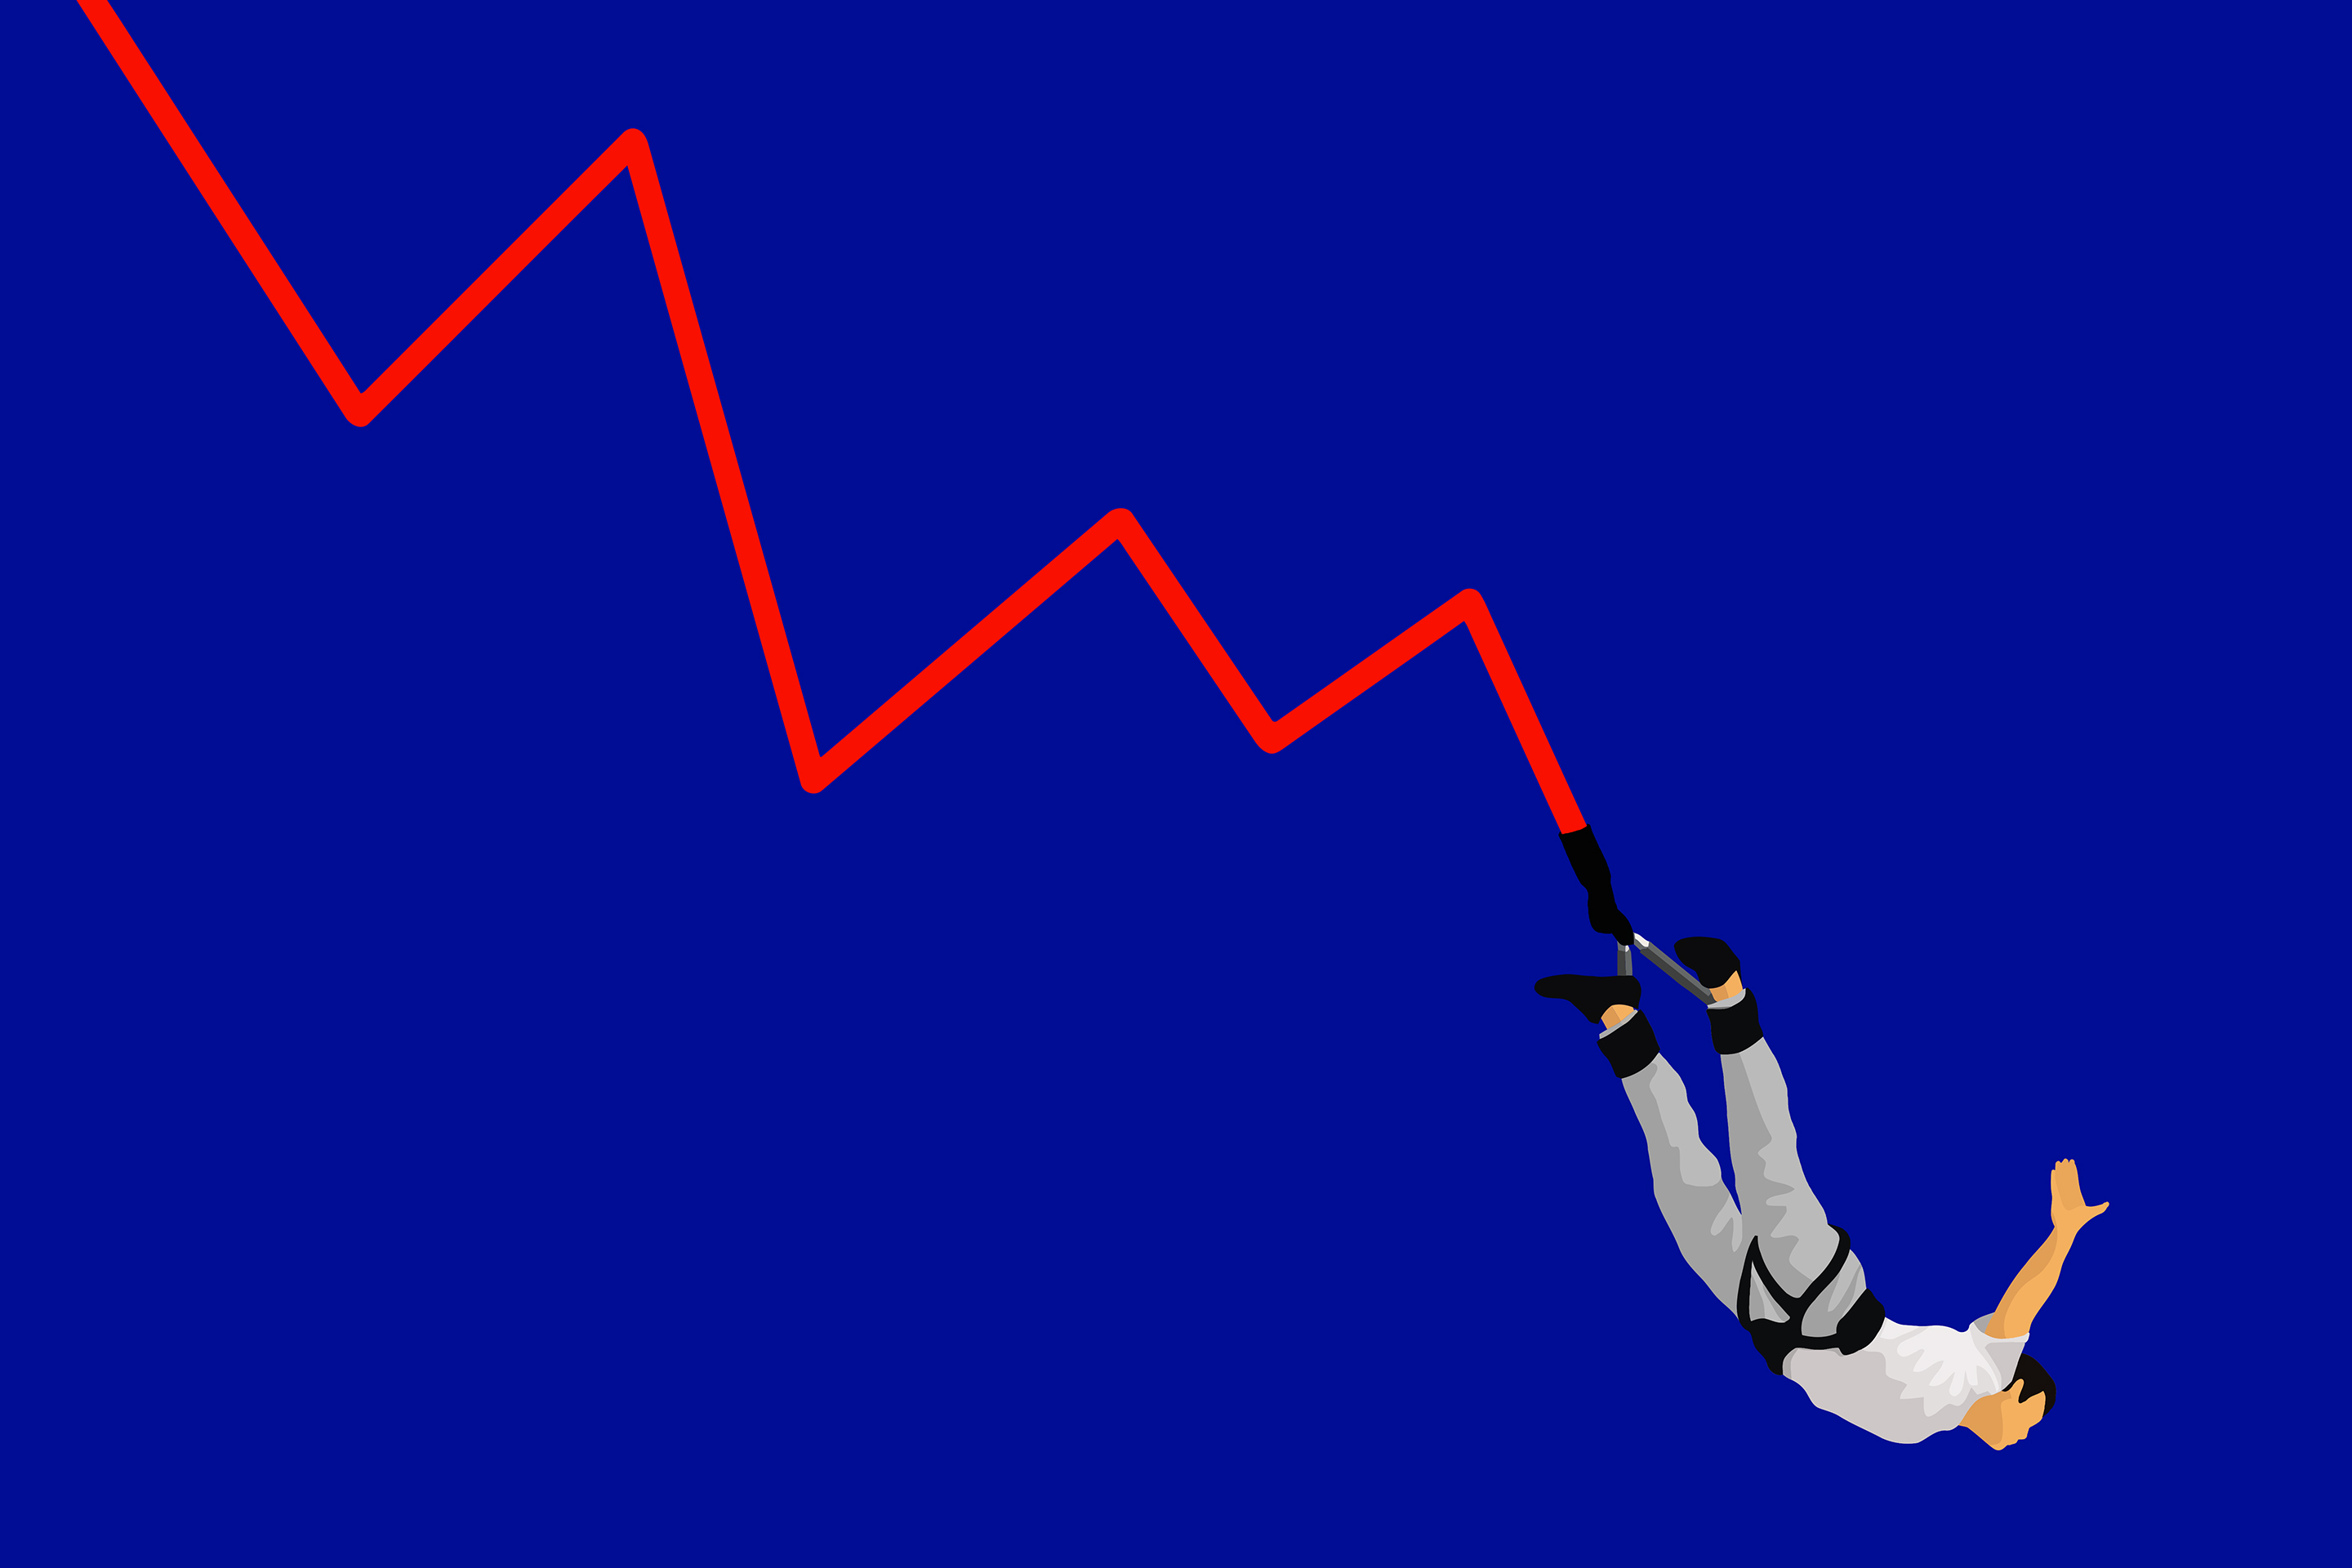 How to Know When the Stock Market Has REALLY Hit Rock Bottom